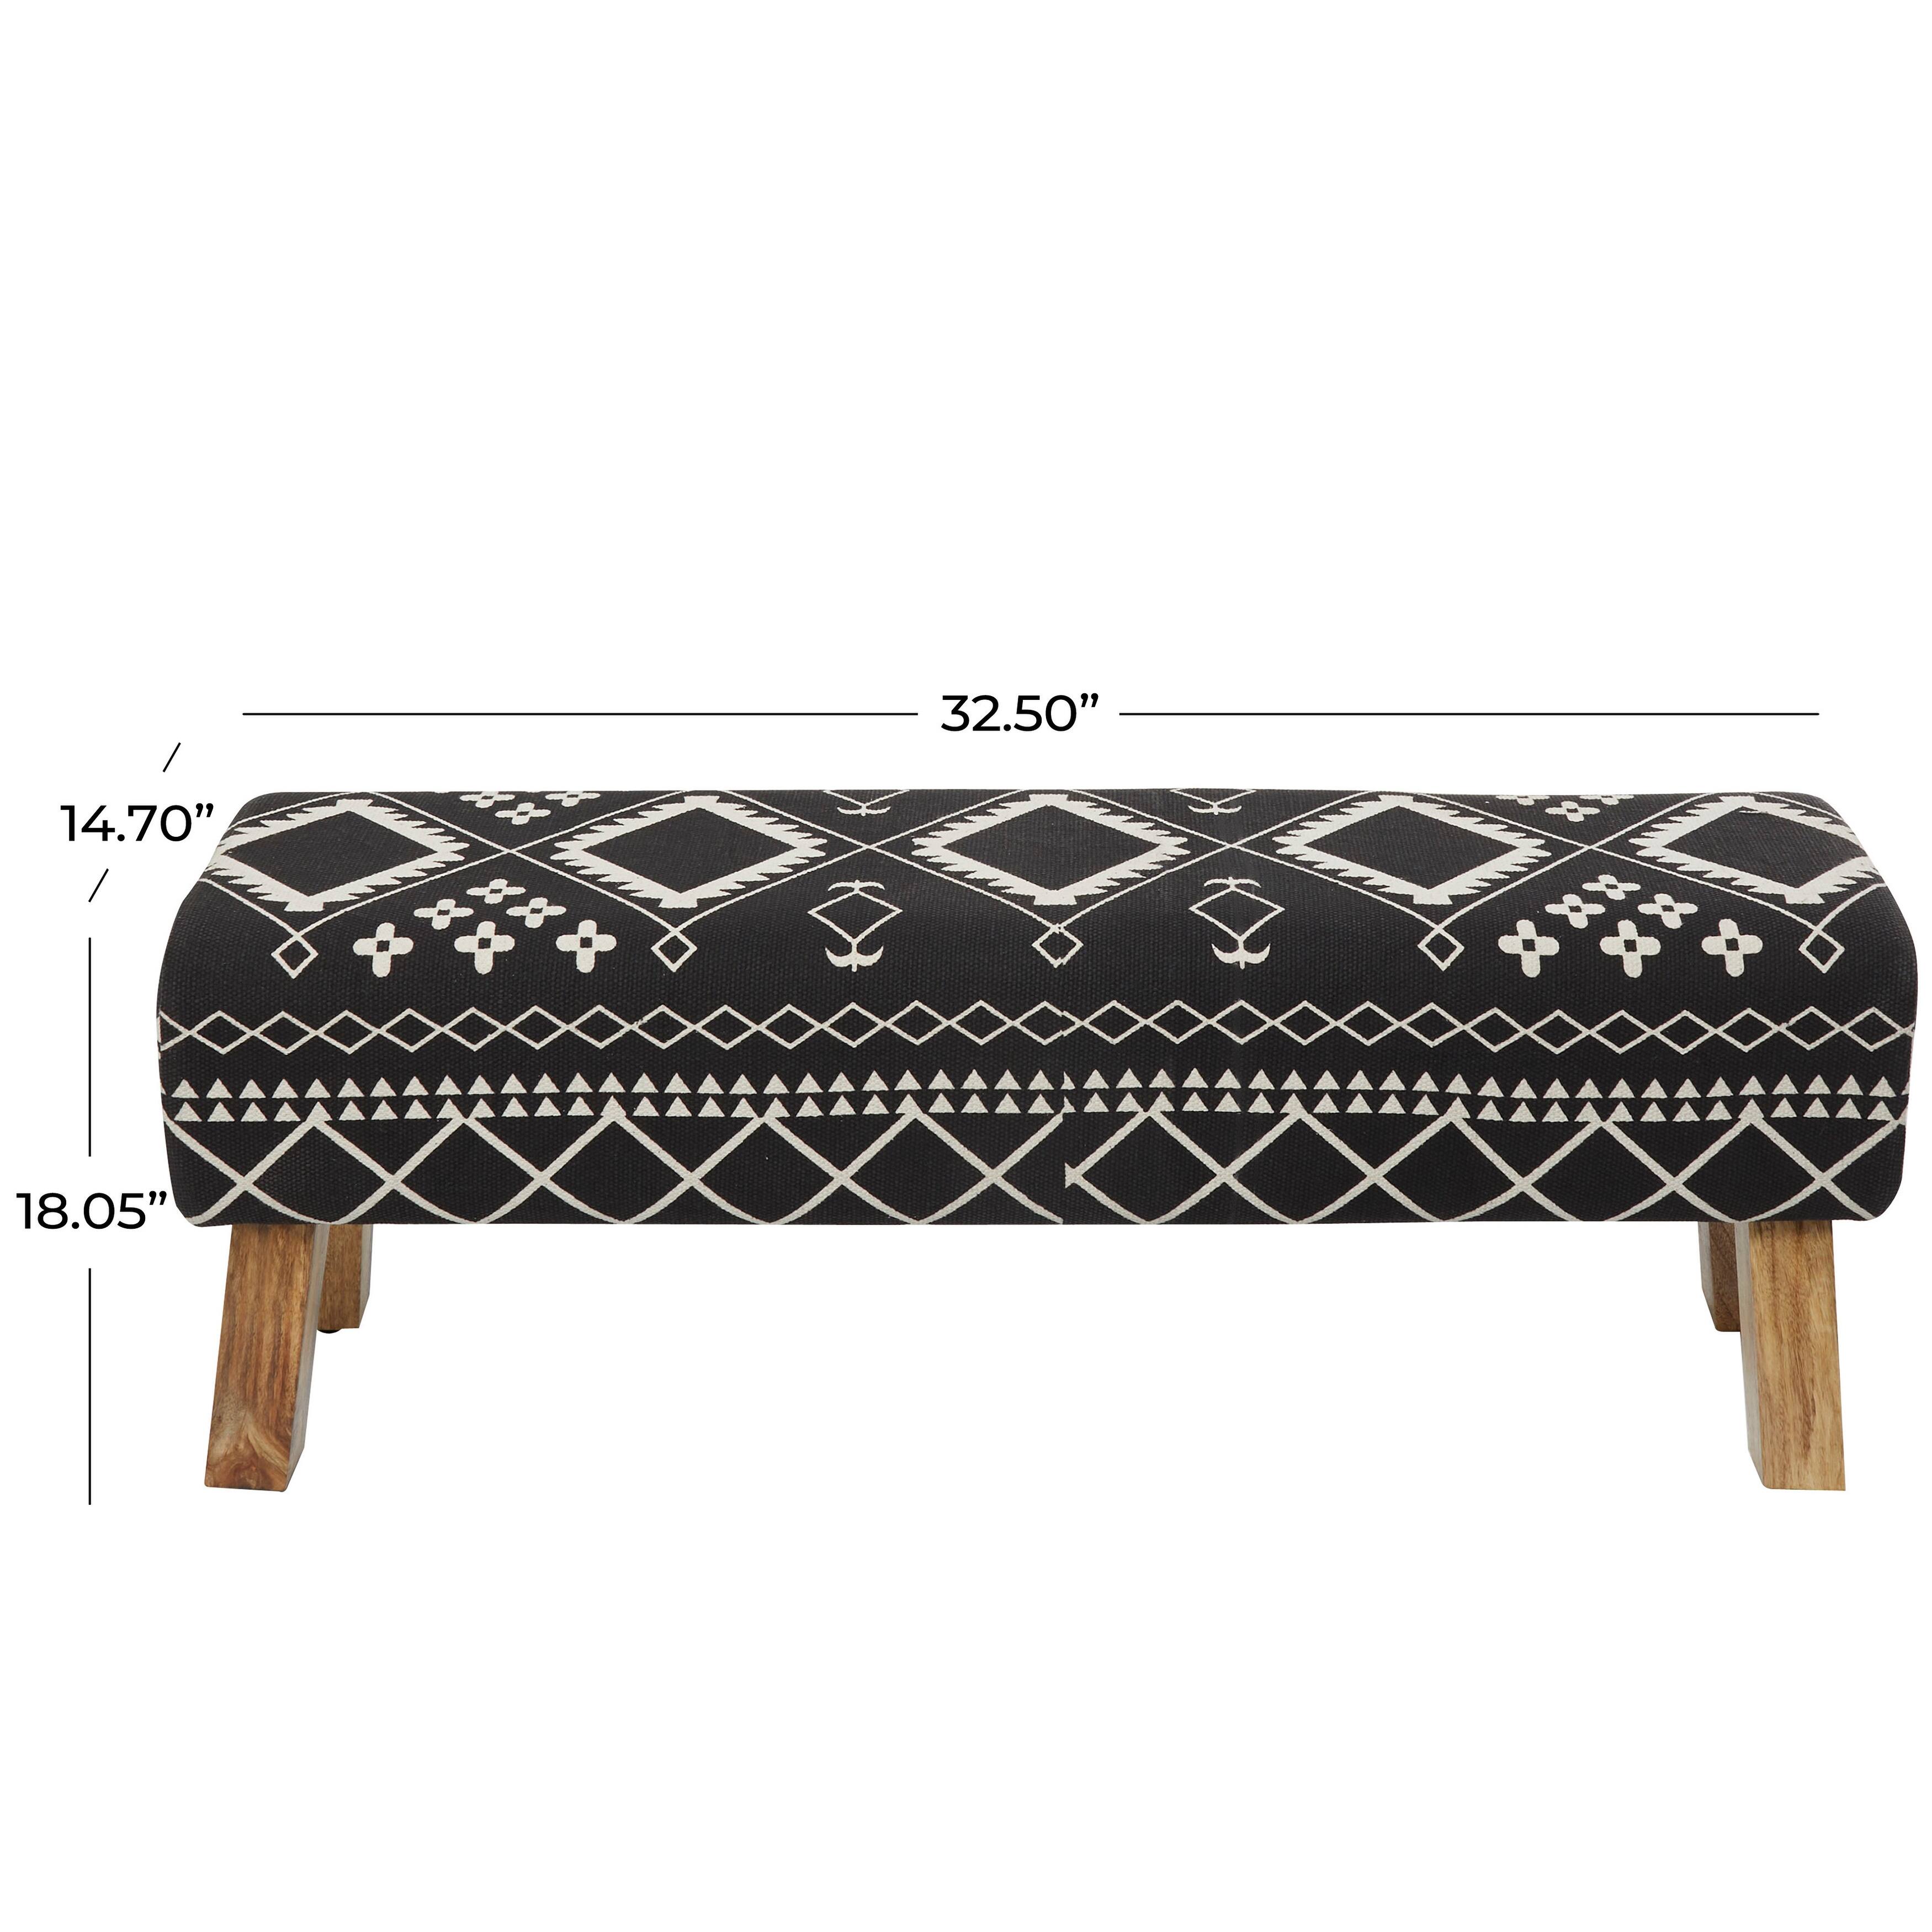 Black Wood Upholstered Geometric Bench with Tapered Wooden Legs